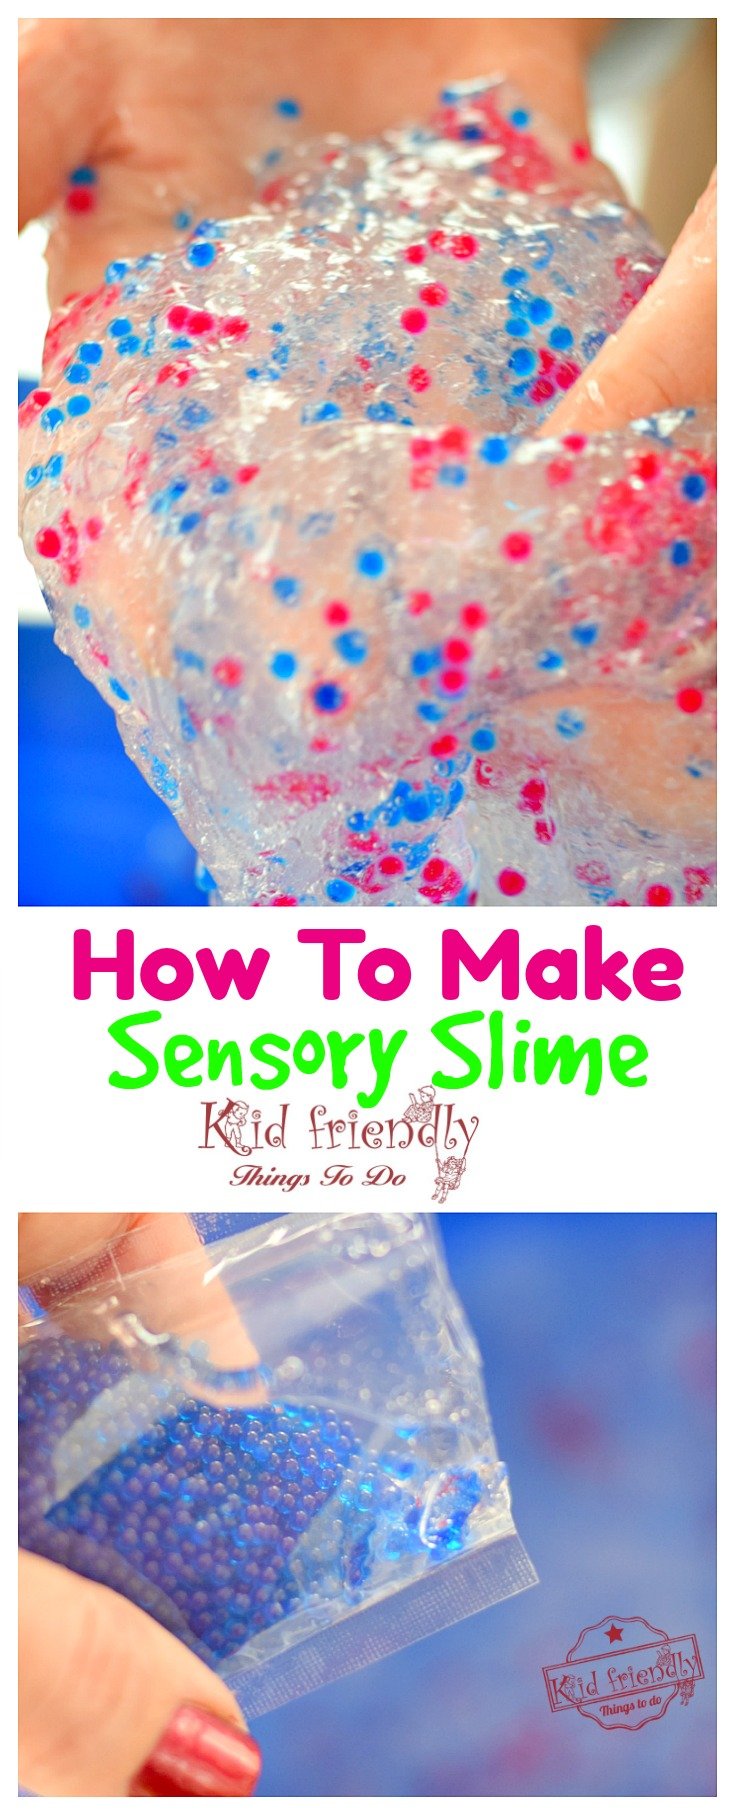 How to Make Homemade Sensory Slime - A Fun and Easy DIY Recipe for Kids - With just 4 simple to find ingredients. www.kidfriendlythingstodo.com